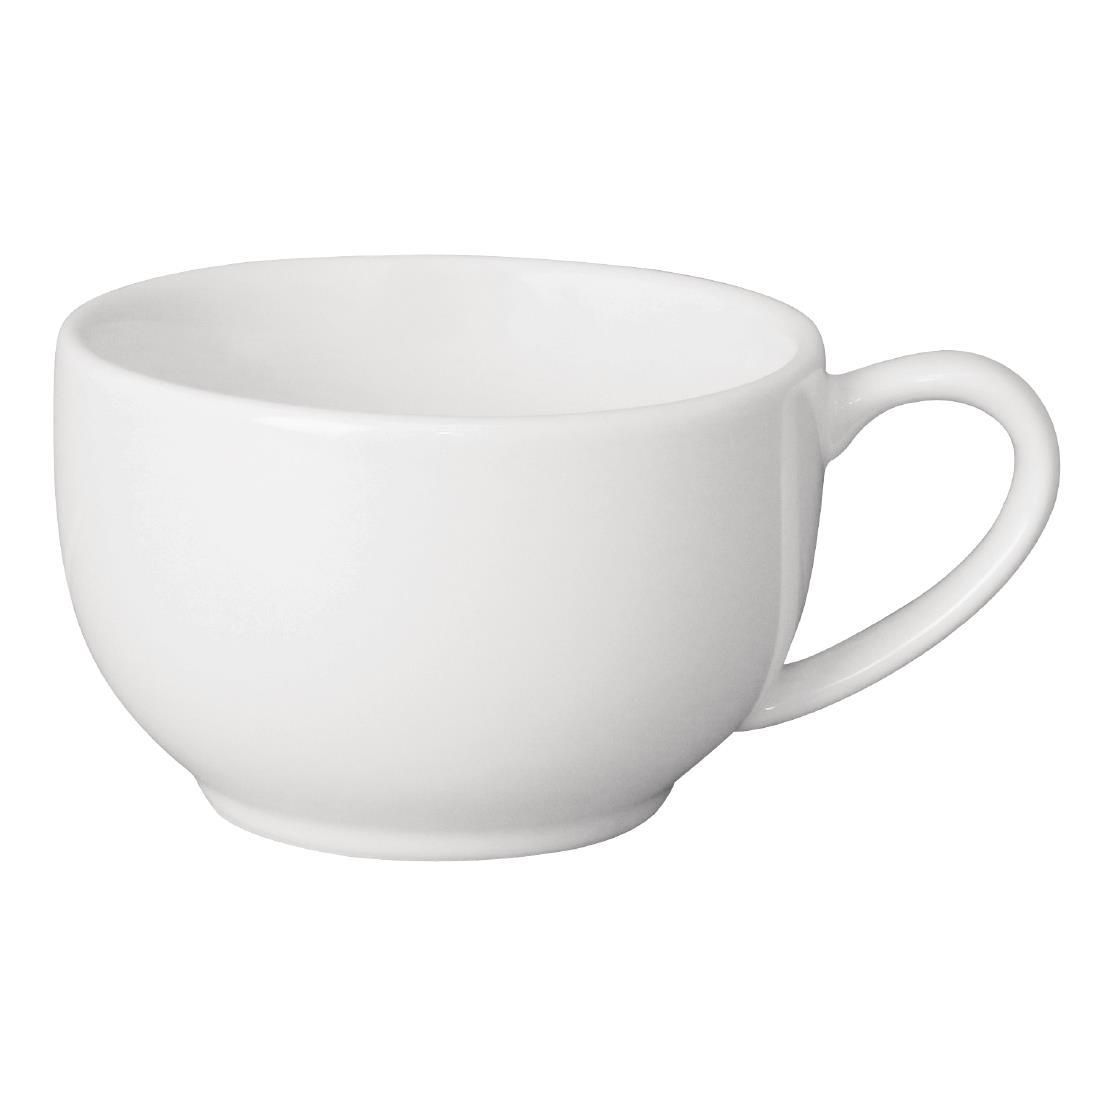 Olympia Cafe Coffee Cups White 228ml (Pack of 12) - GK074  - 2